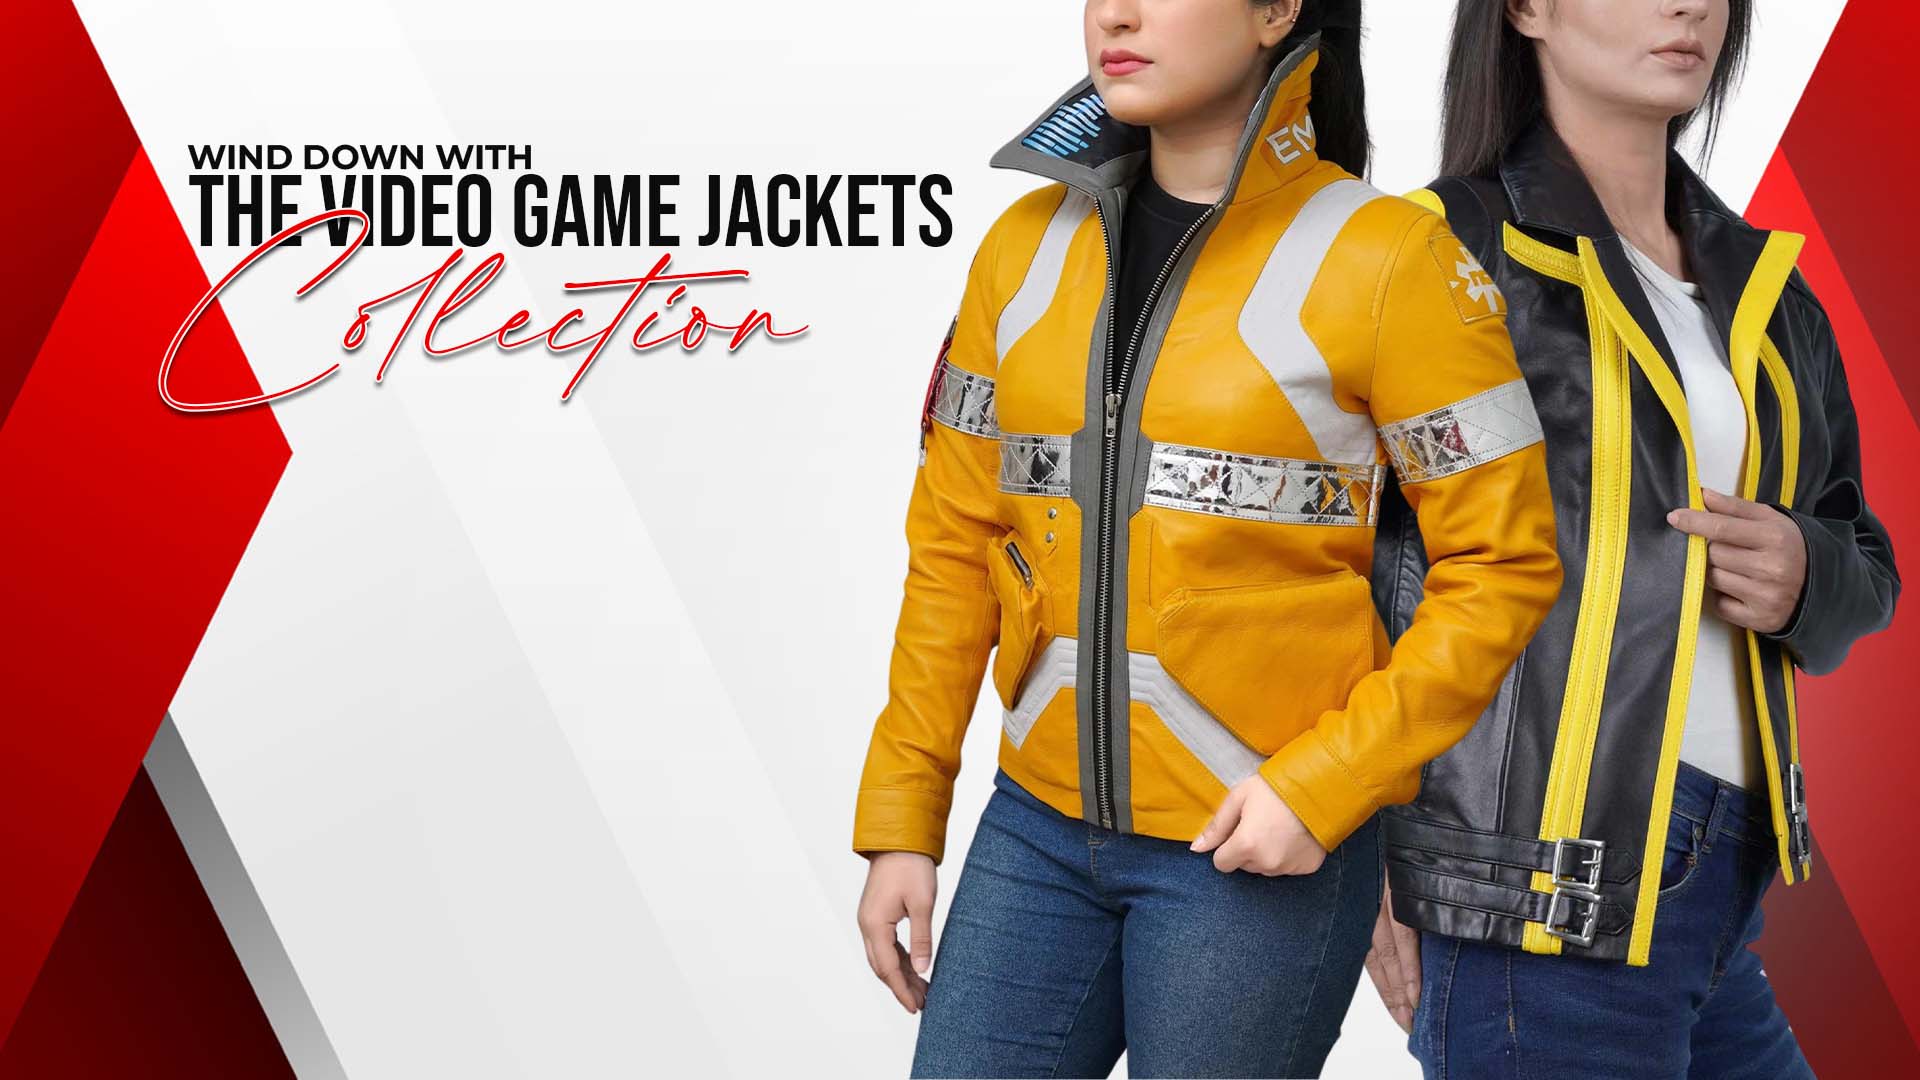 Wind Down With The Video Game Jackets Collection